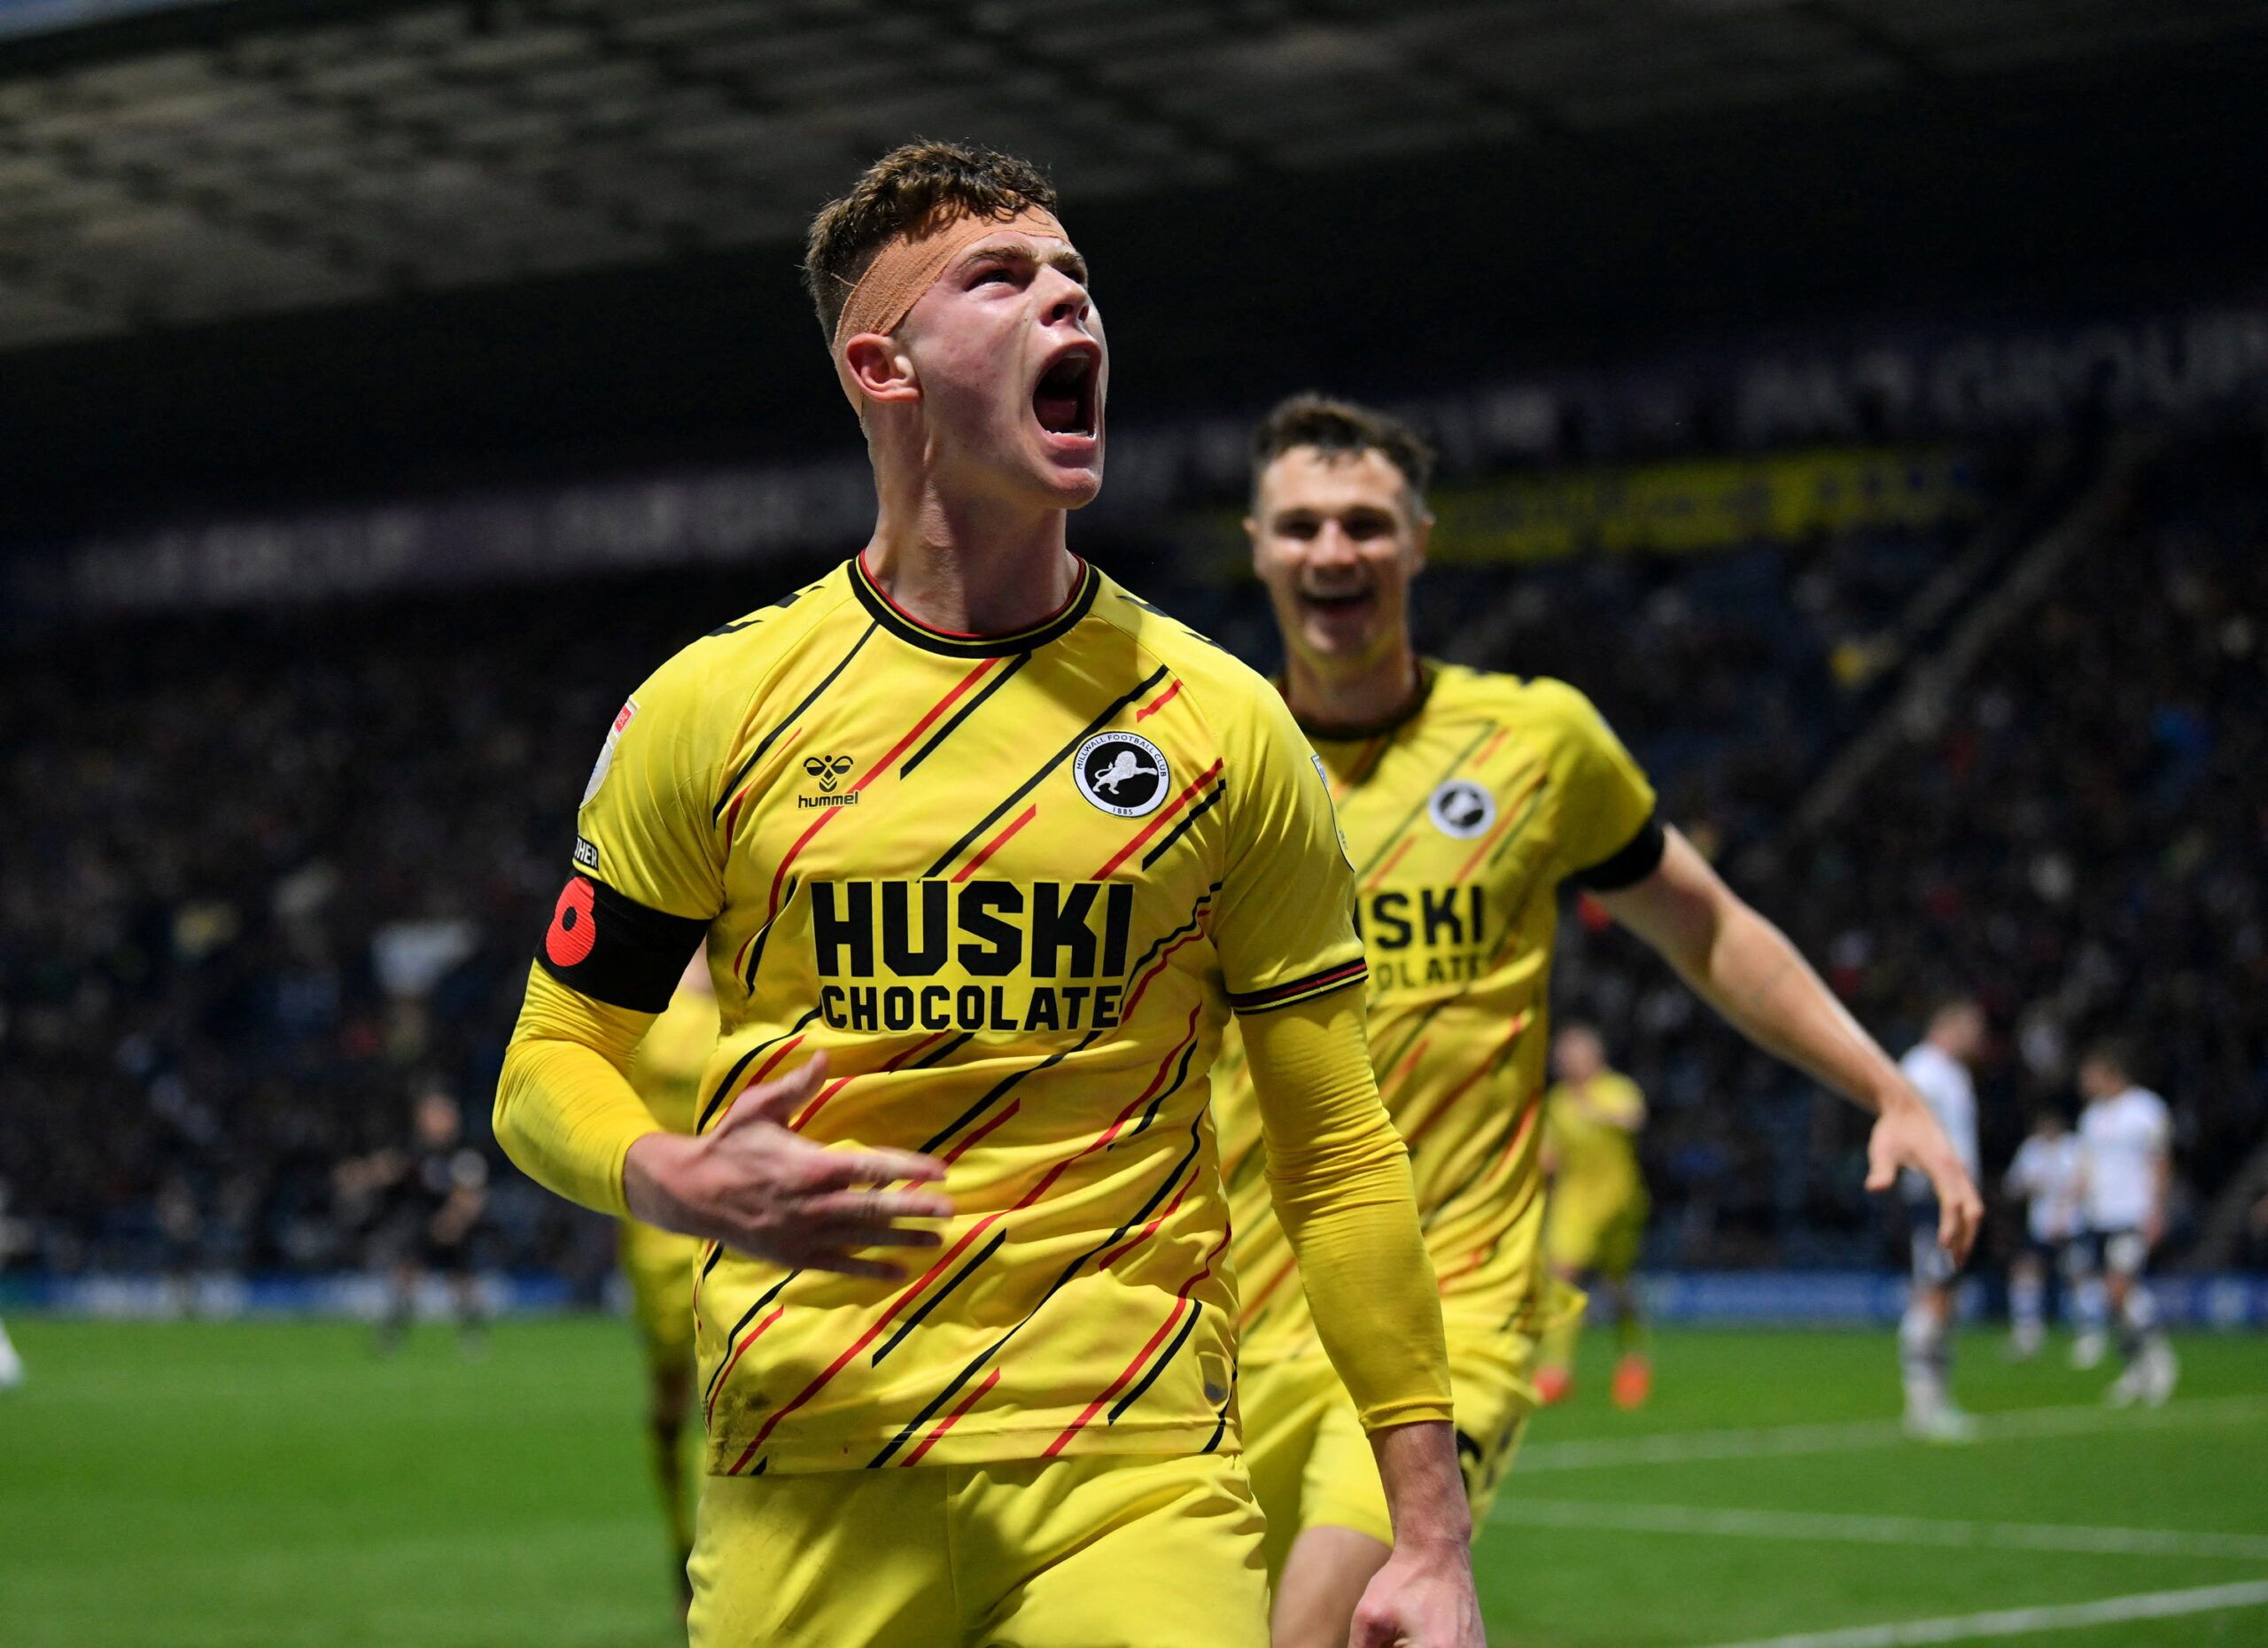 Soccer Football - Championship - Preston North End v Millwall - Deepdale, Preston, Britain - Nevember 12, 2022 Millwall's Charlie Cresswell celebrates scoring their fourth goal Action Images/Paul Burrows  EDITORIAL USE ONLY. No use with unauthorized audio, video, data, fixture lists, club/league logos or 